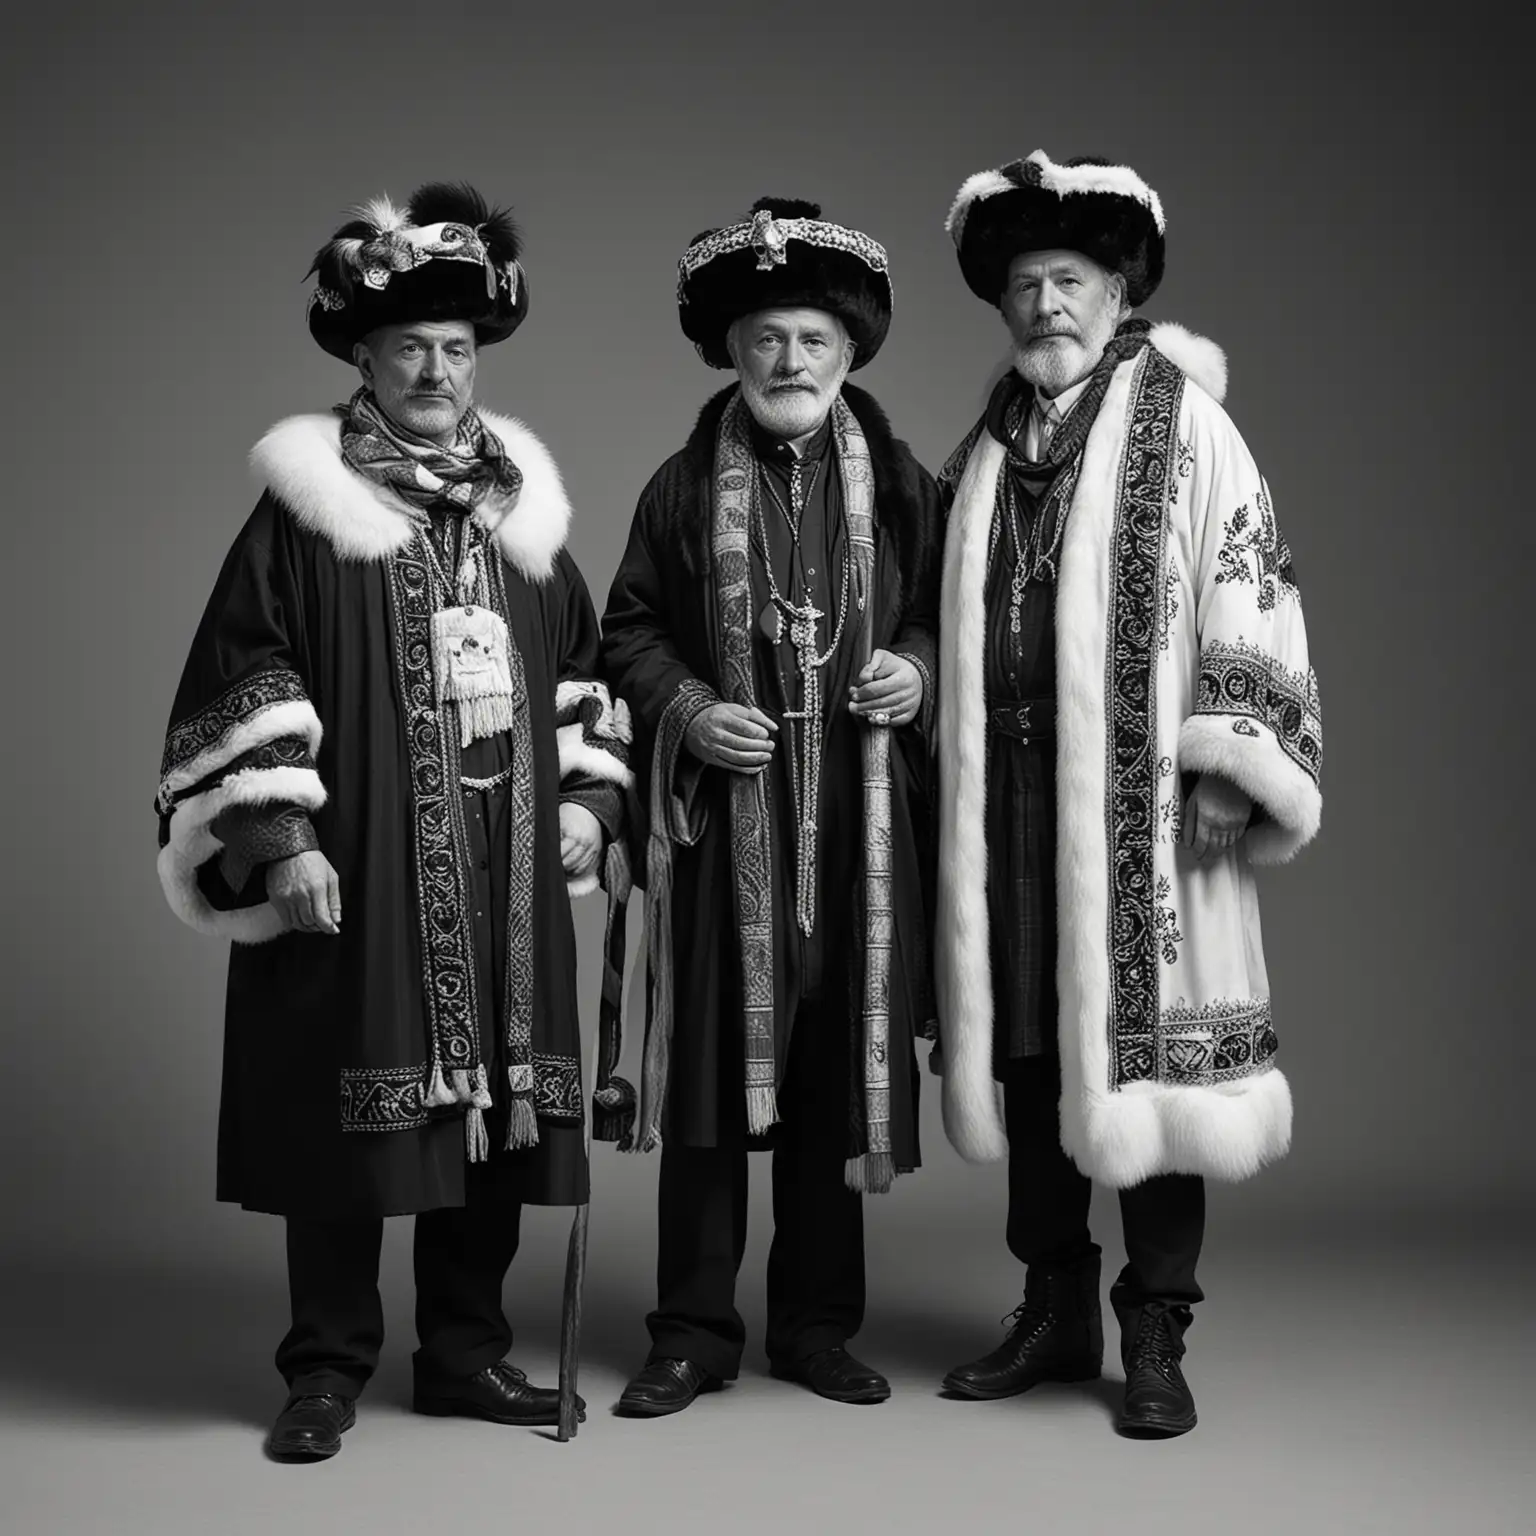 Ceremonial Christian Robes Two Men in Christian Attire with Fur Hats and Scarves